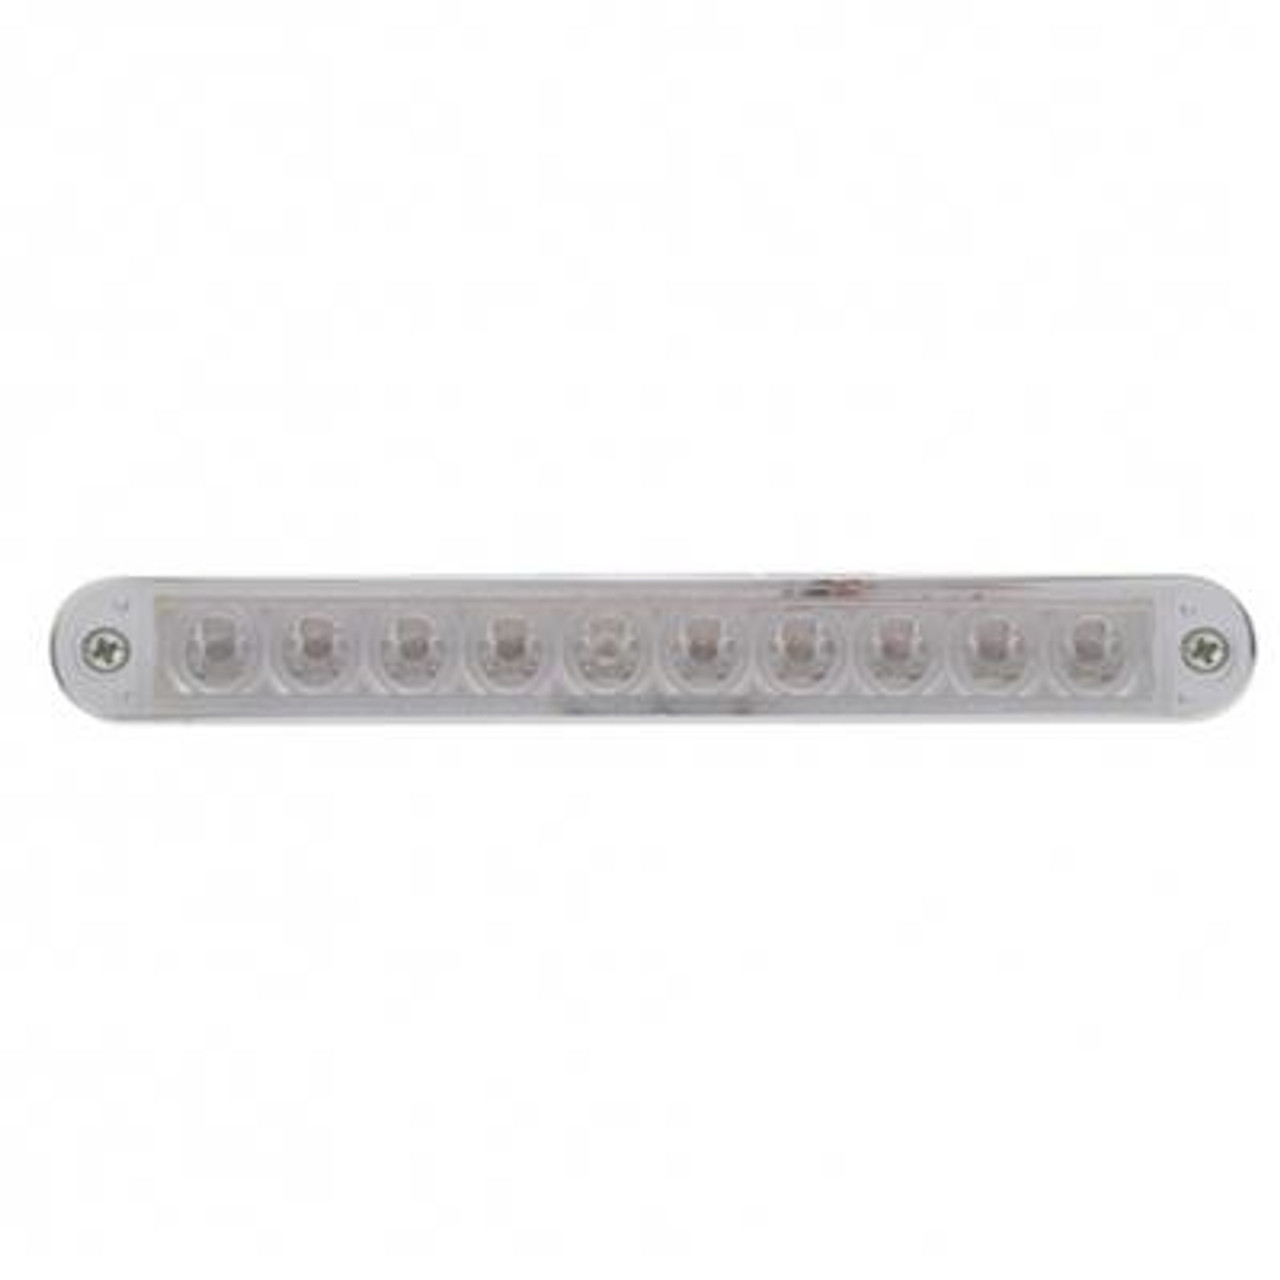 10 LED 6-1/2" light bar with chrome plastic bezel.
Polycarbonate lens sonically sealed to housing to prevent moisture intrusion.
Mounting screws can be moved to accommodate mounting distance from 2-1/4" to 4-7/8".
6-1/2" chrome plastic light bar bezel available separately: item # 30945B.
Red LED with clear lens light item # 39687B.